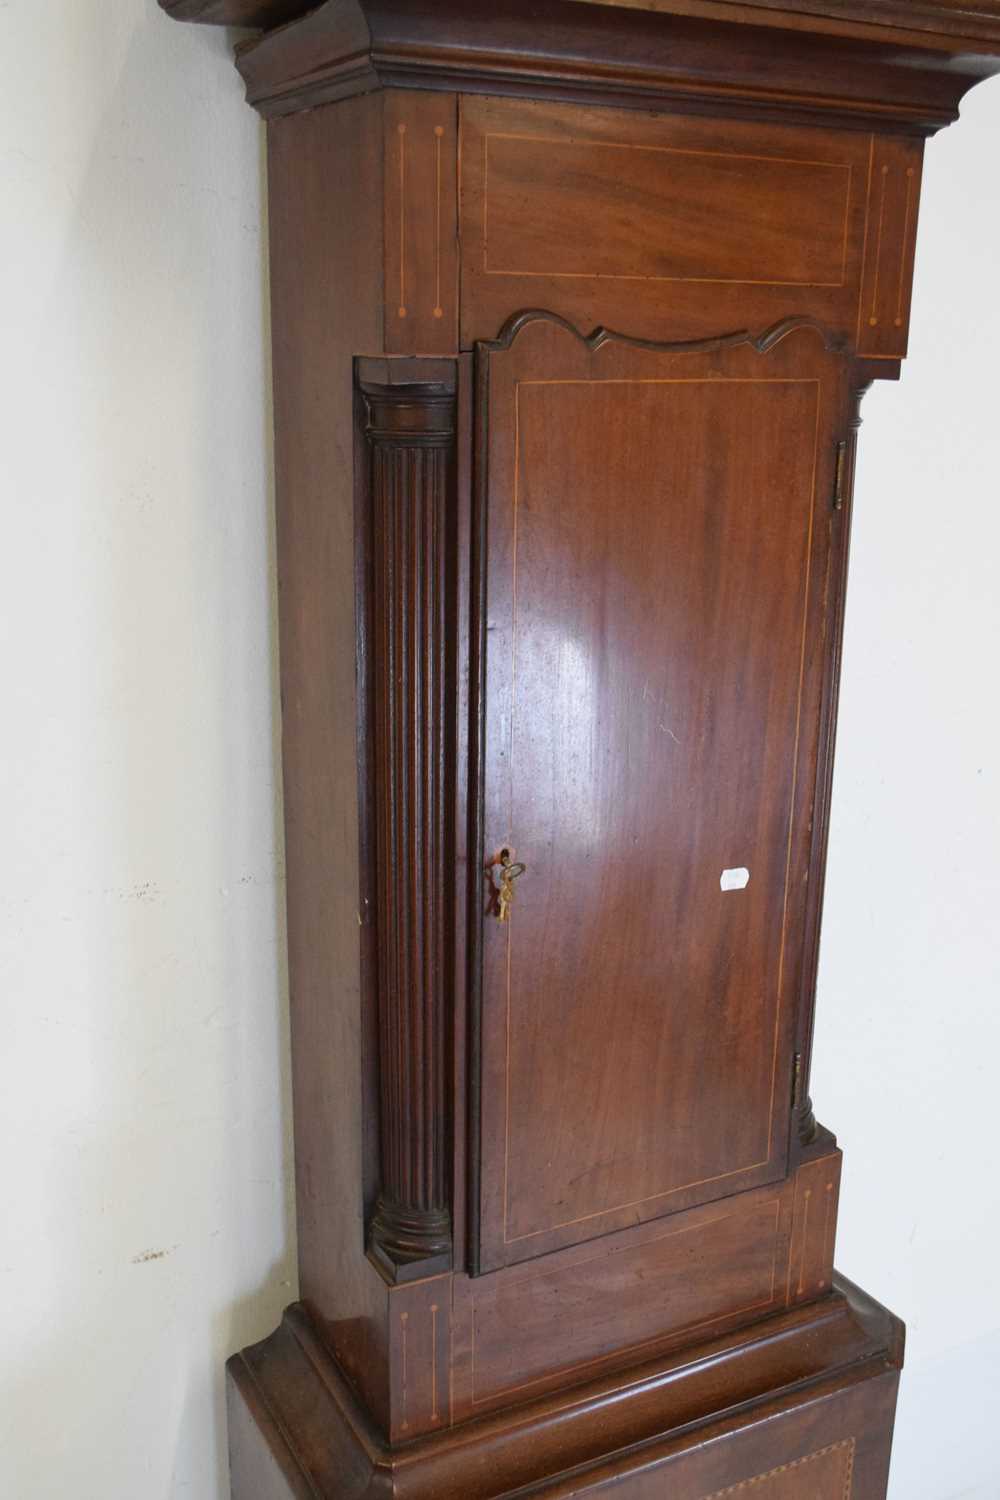 Early 19th Century inlaid mahogany cased 8-day brass dial longcase clock - Richard Hornby, Oldham - Image 8 of 14